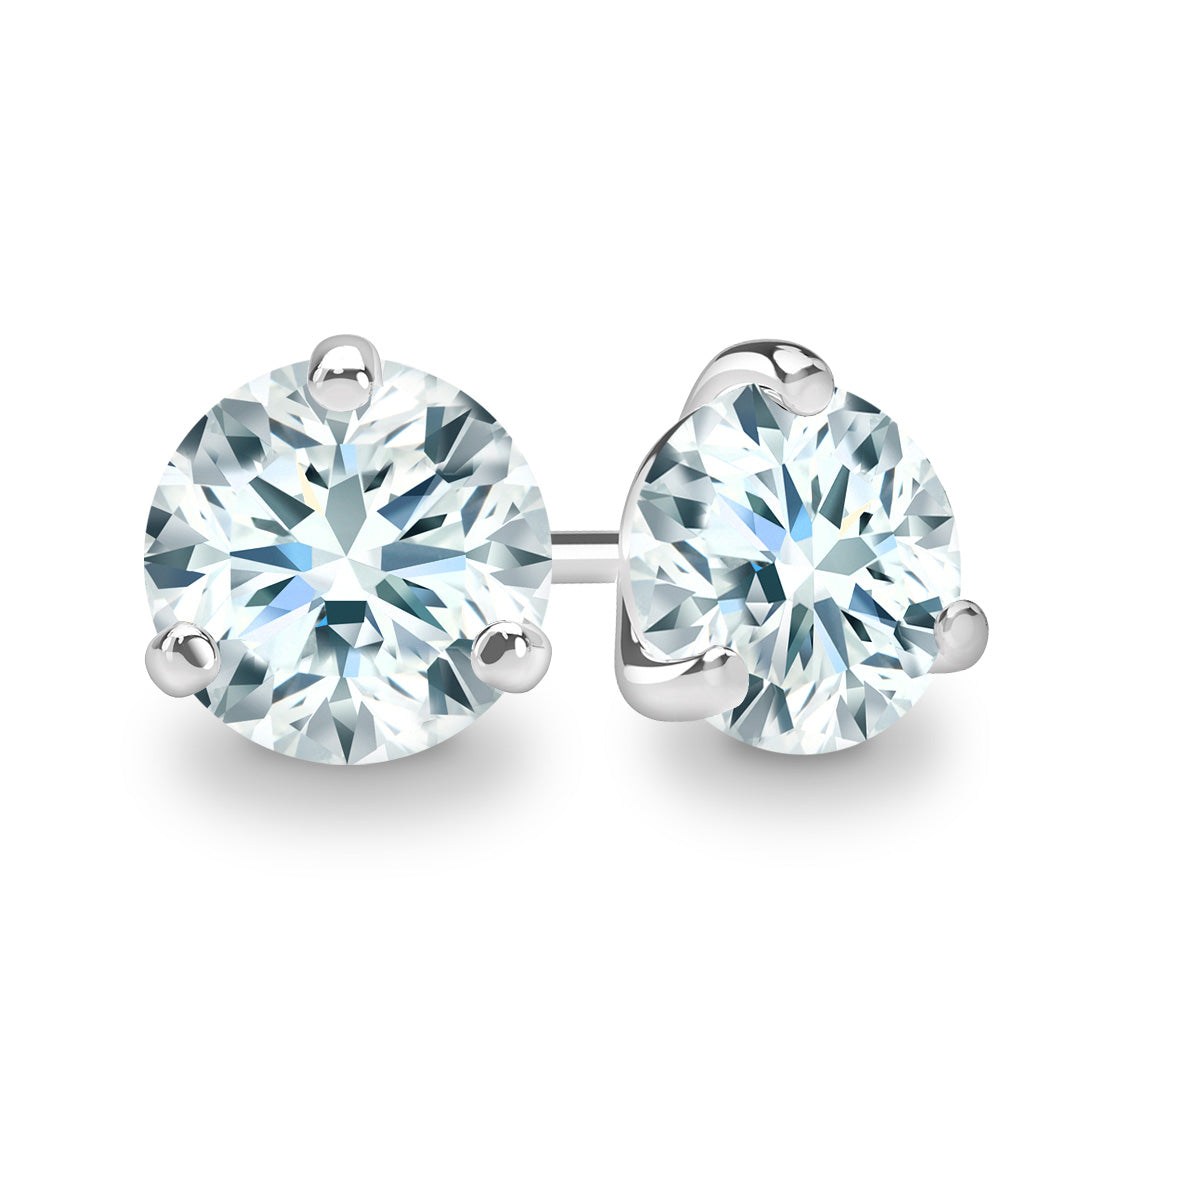 3 Claw White Gold Certified Diamond Stud Earrings 2.01ct